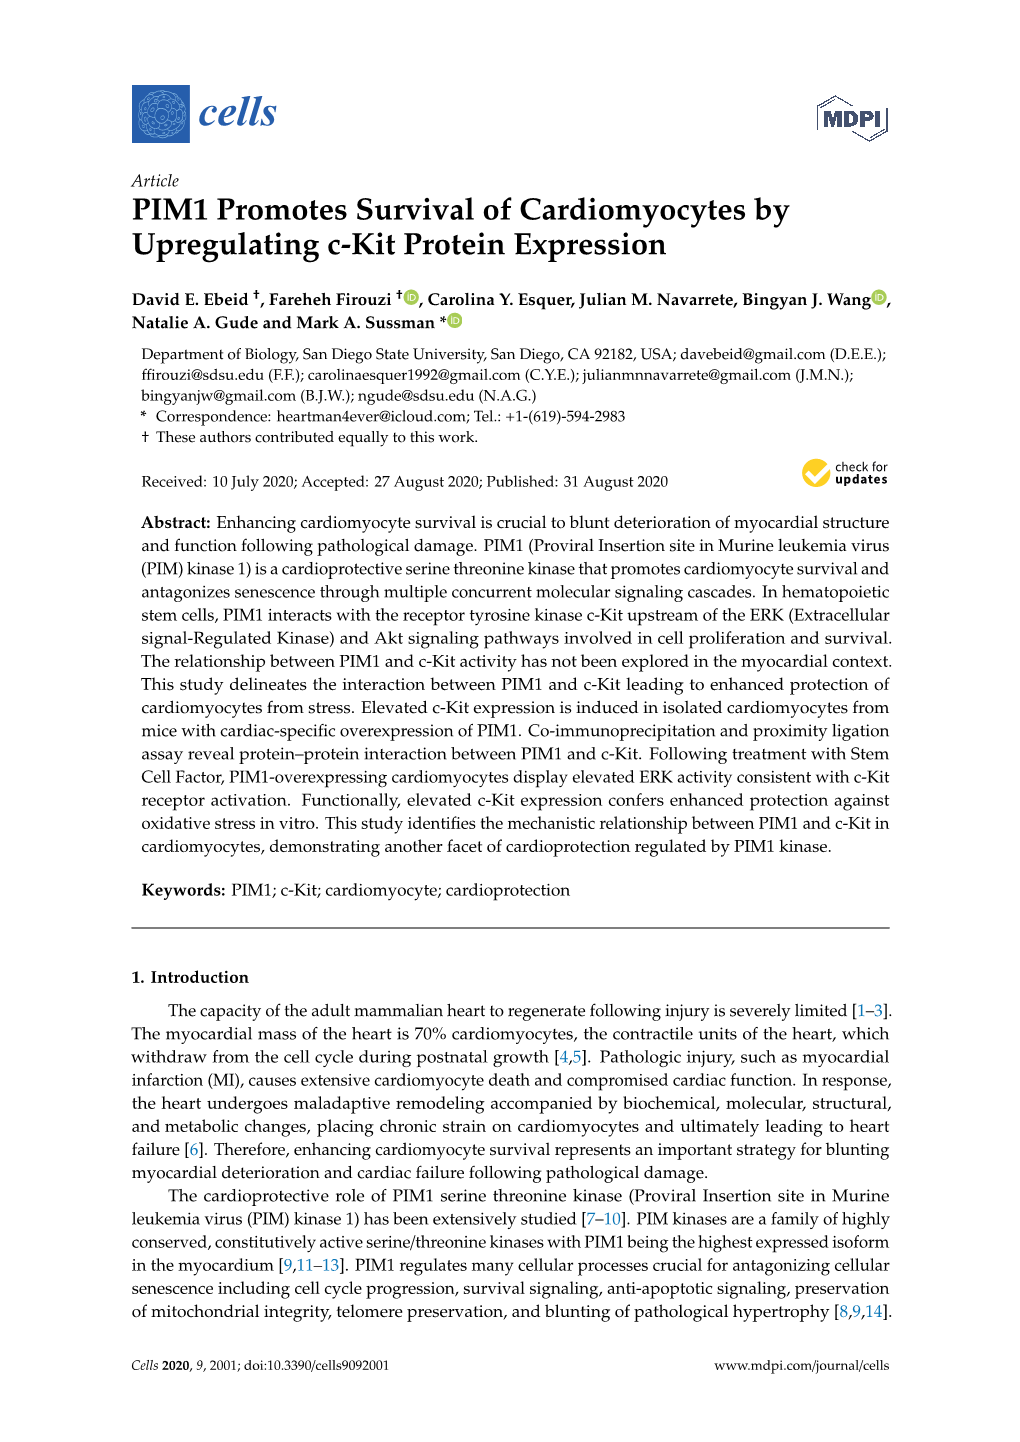 PIM1 Promotes Survival of Cardiomyocytes by Upregulating C-Kit Protein Expression